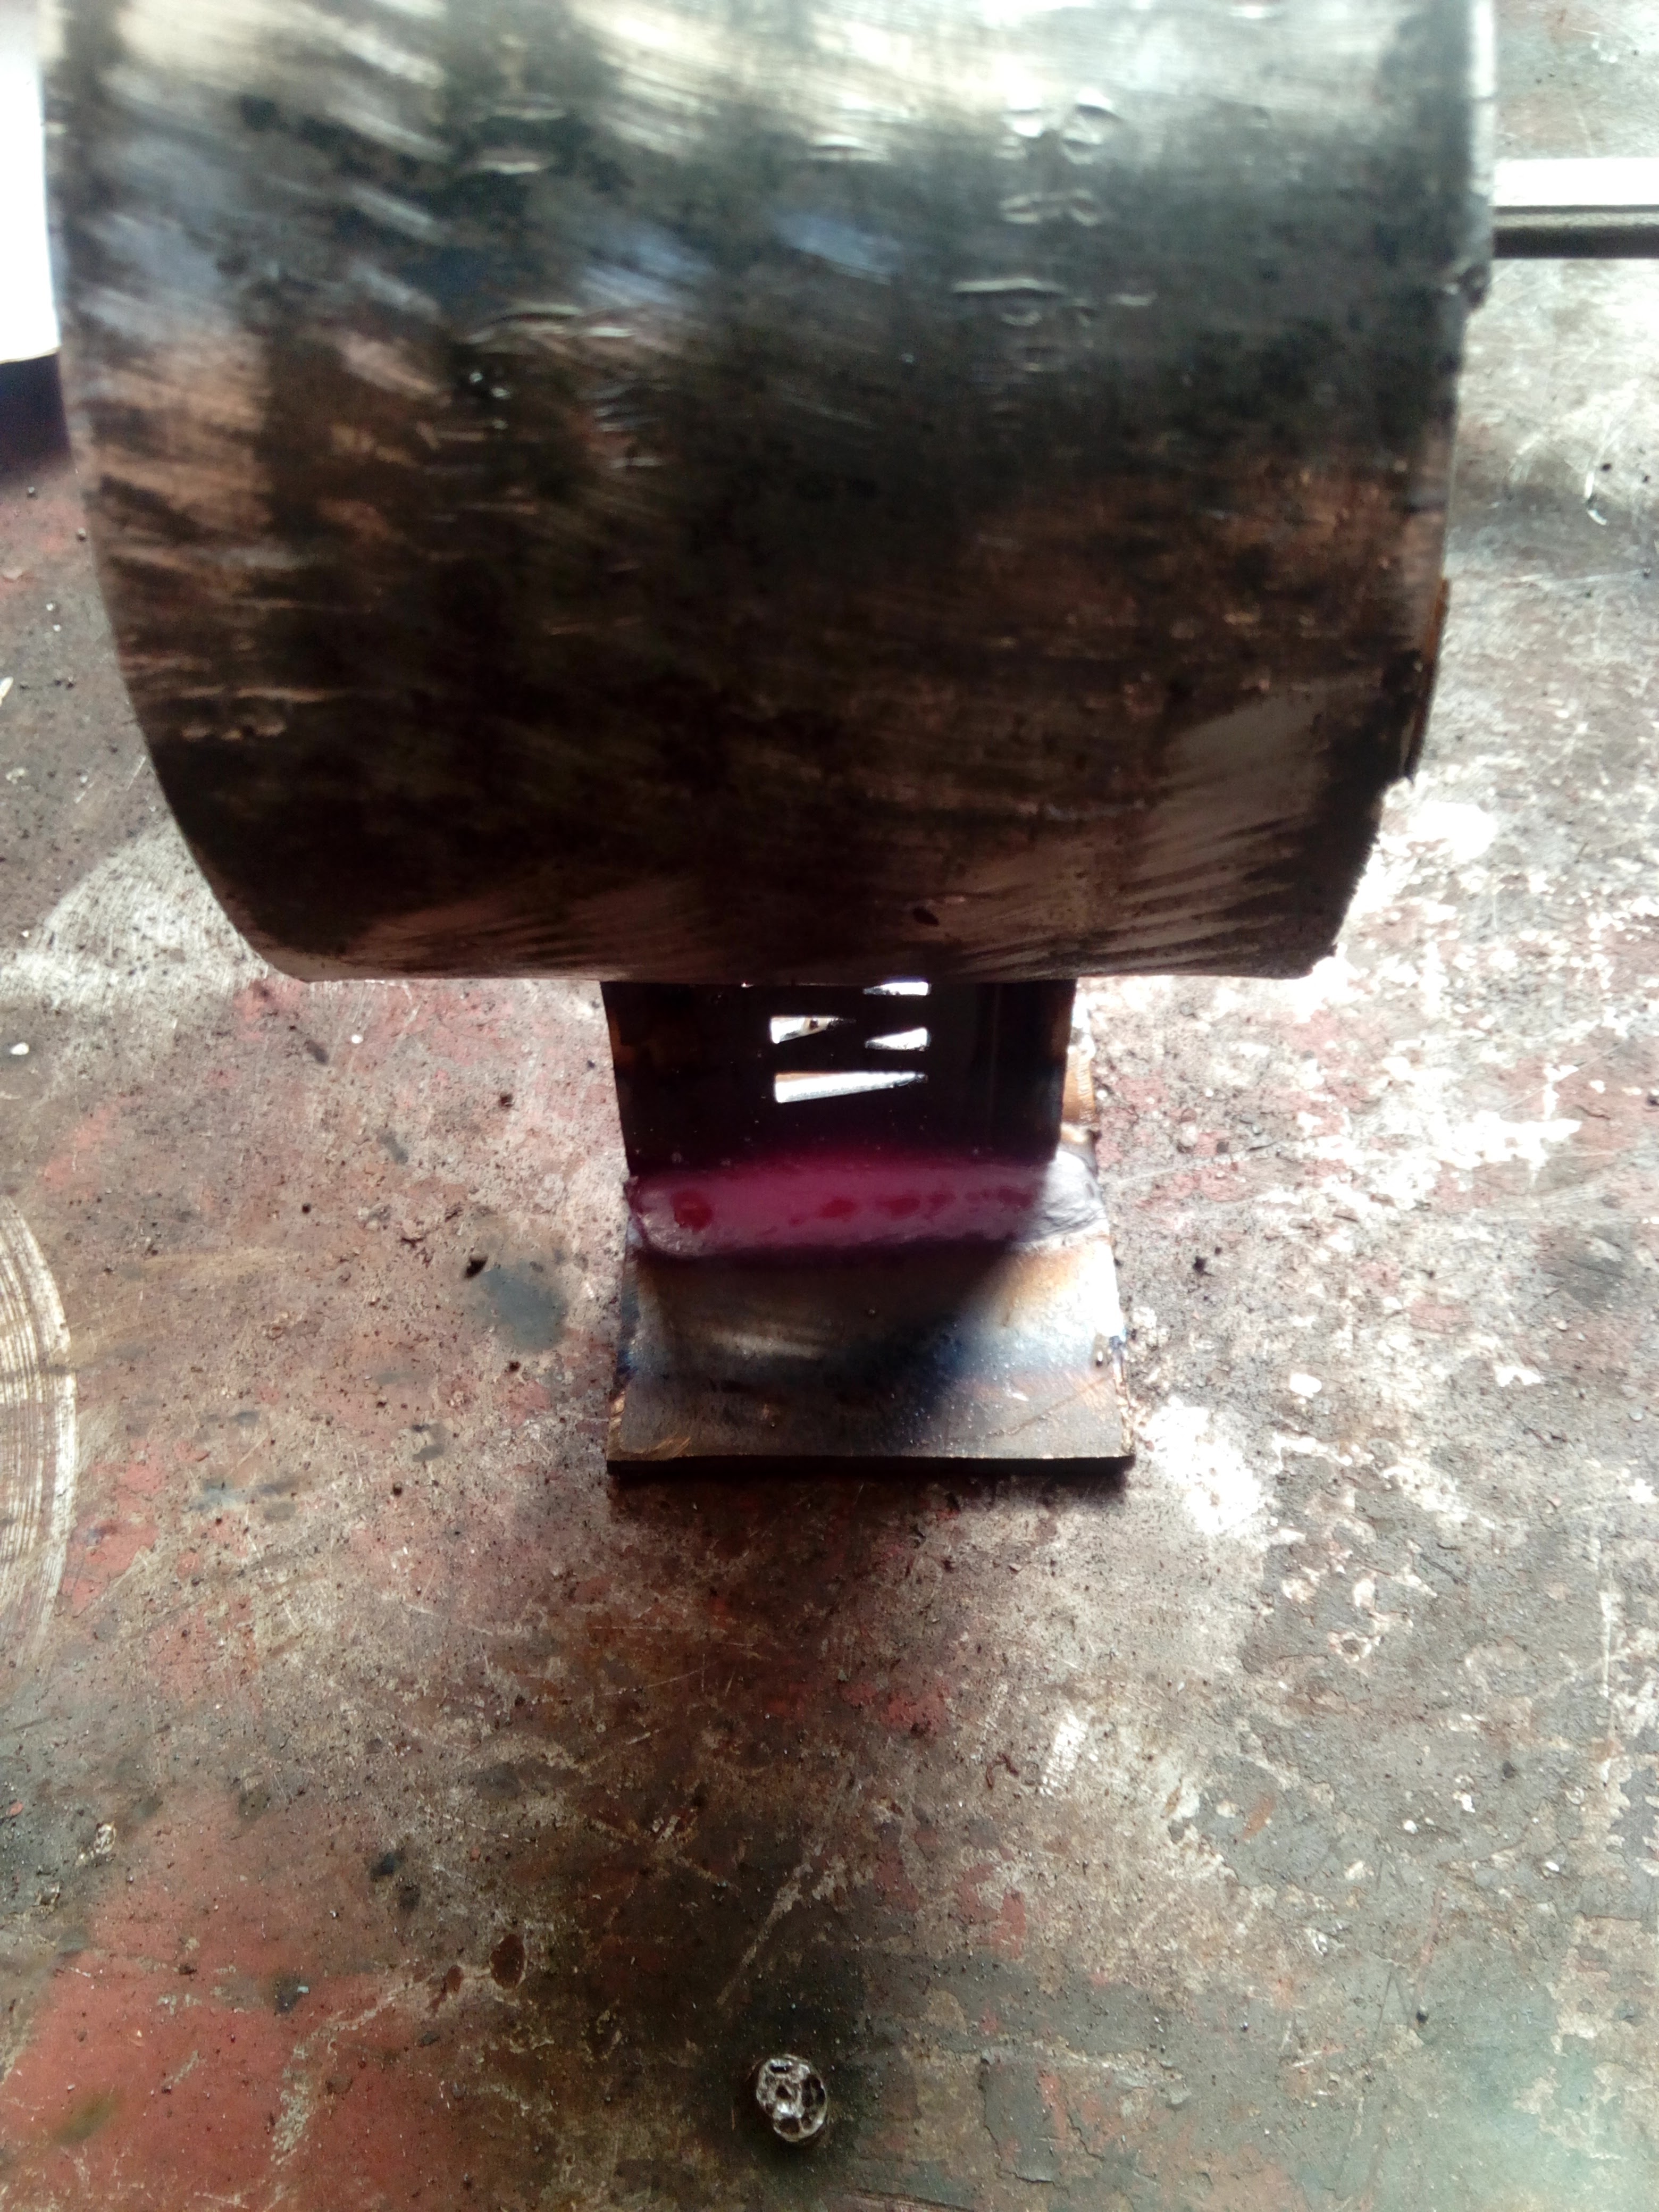 A freshly-welded bracket -- mostly a piece of tube welded to two
pieces of metal, one that has been profiled out by a
computer-controlled plasma cutter to have an M logo in it.